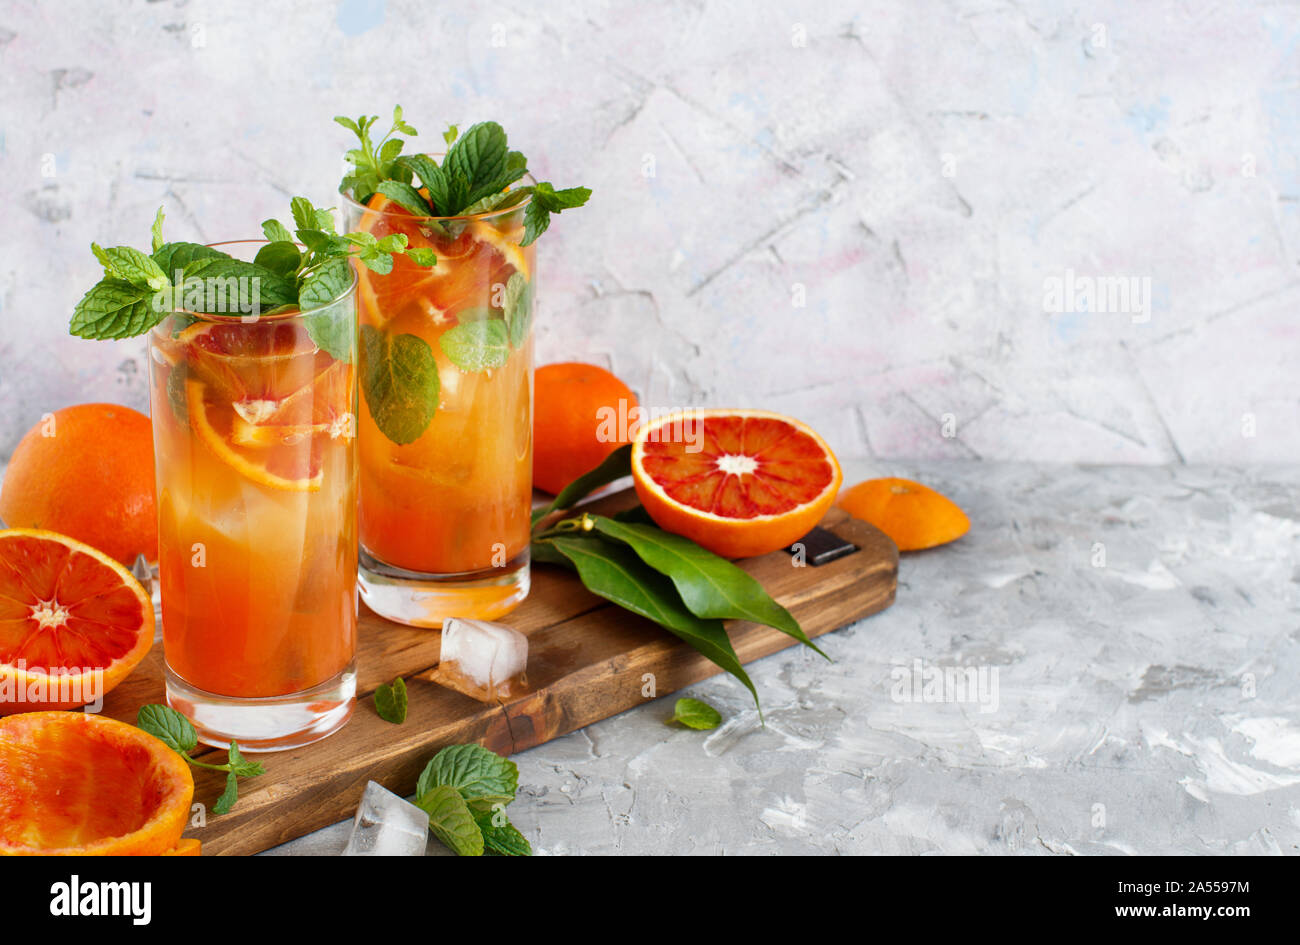 Homemade refreshing drink with bloody orange juice and mint close up Stock Photo